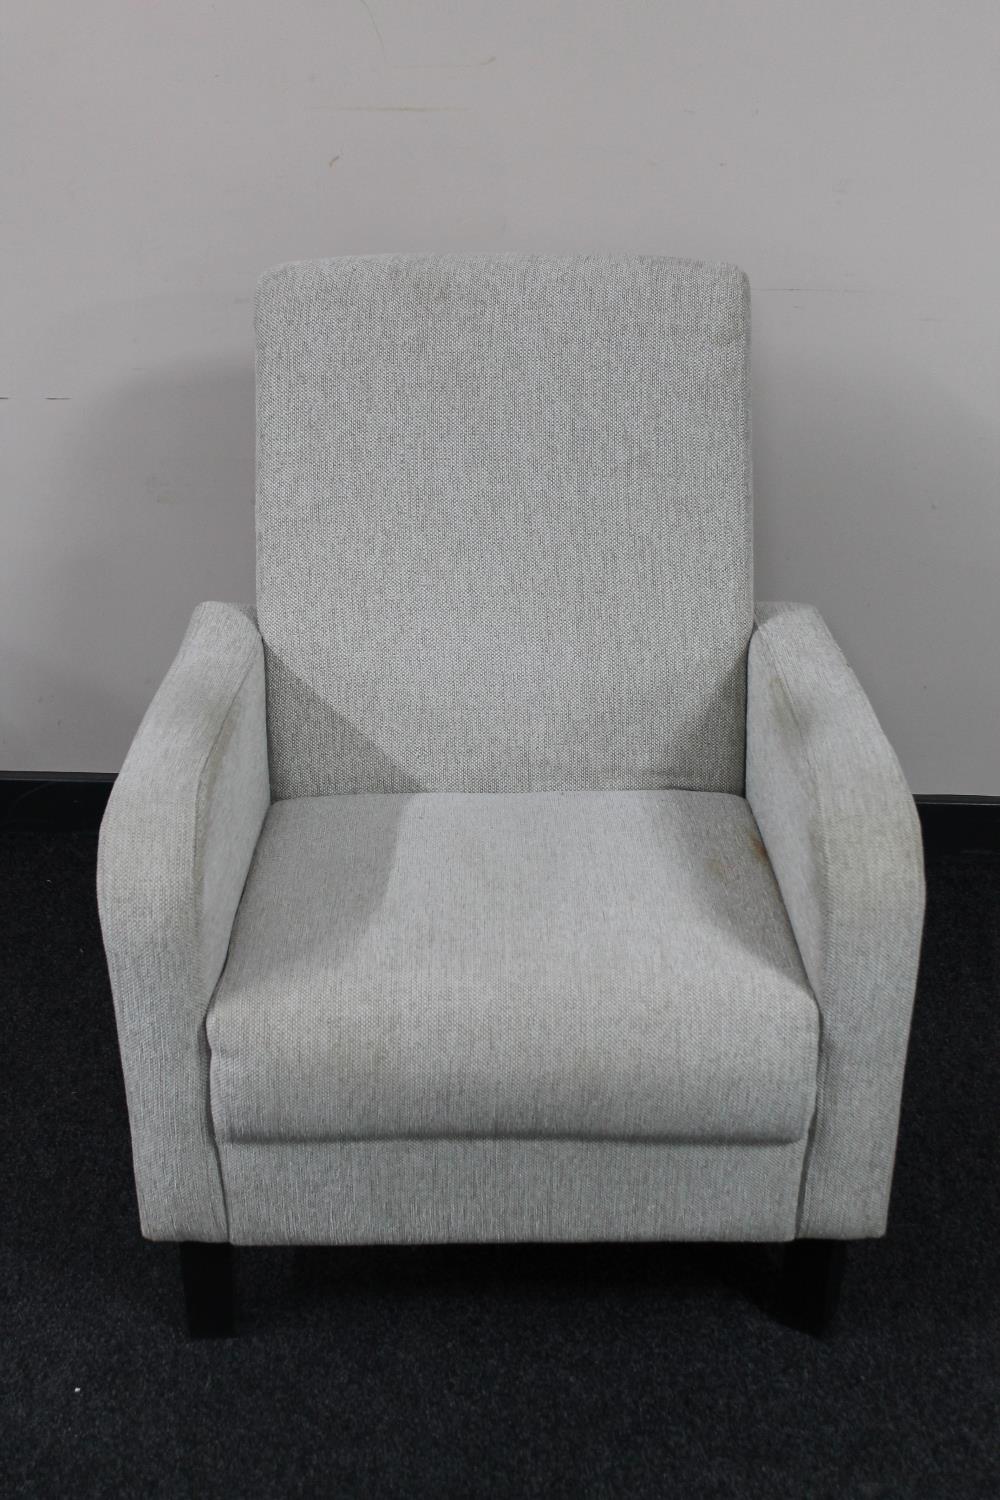 A late 20th century armchair upholstered in a beige fabric